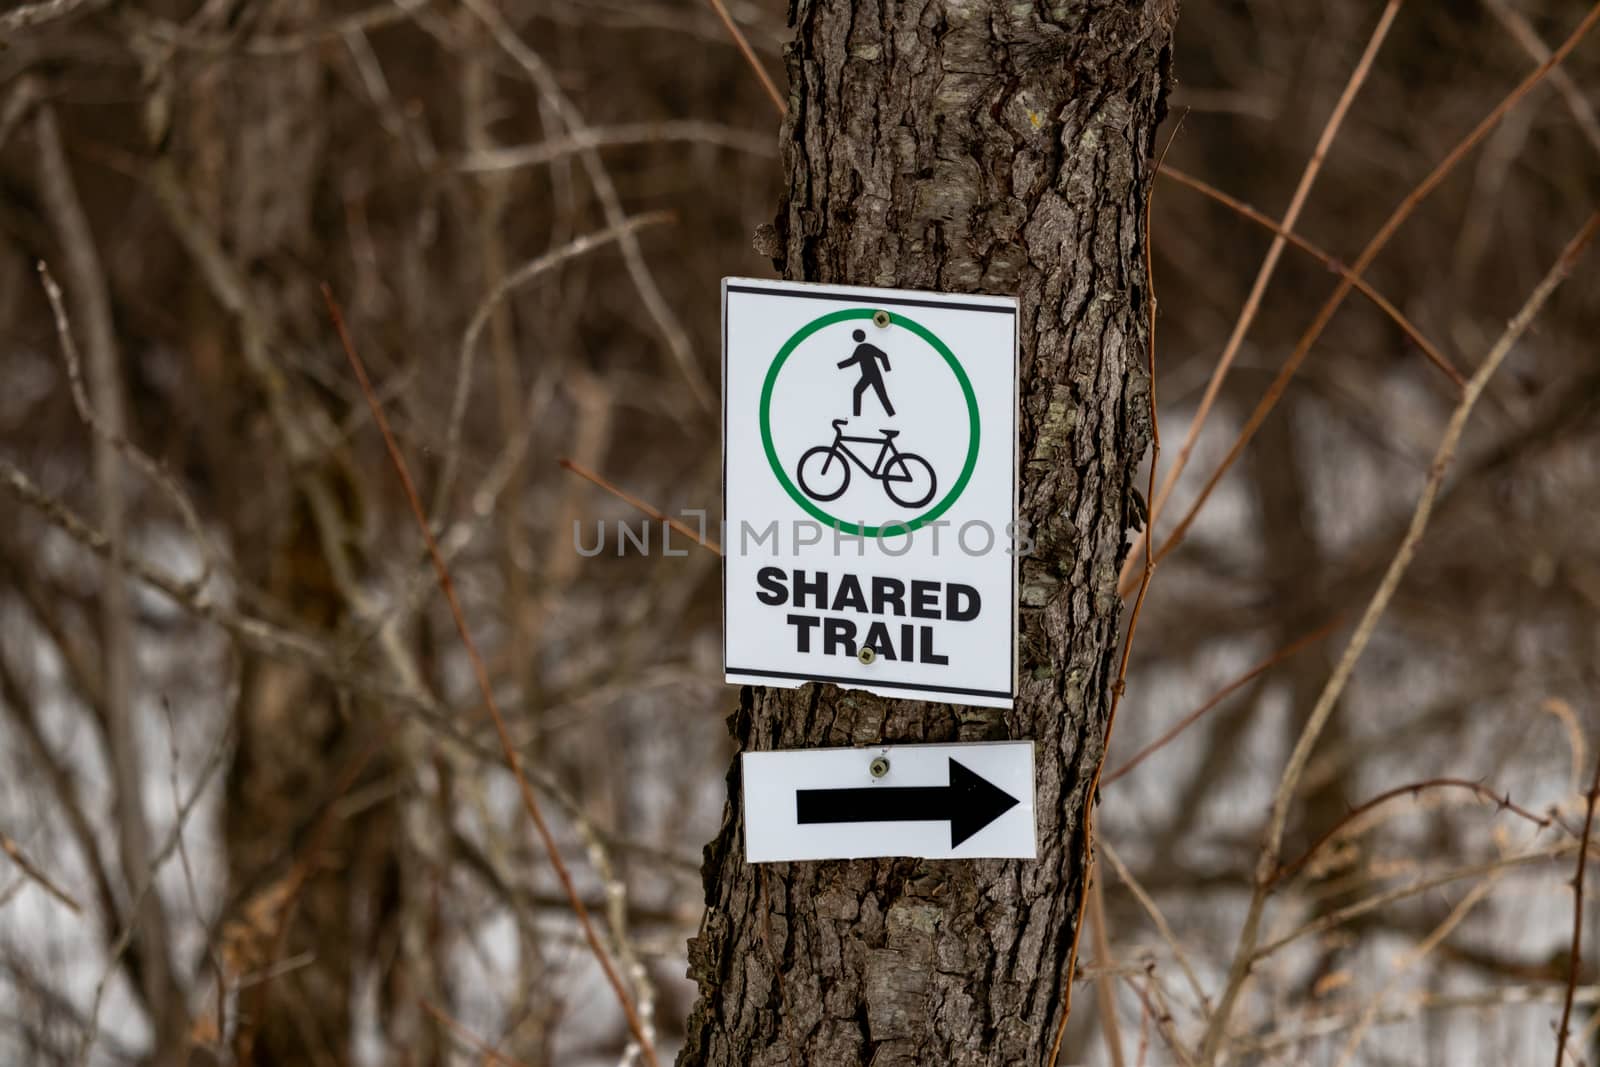 A sign nailed to a tree branch marks a trail shared by hikers on foot and cyclists through the forest with symbols and an arrow.